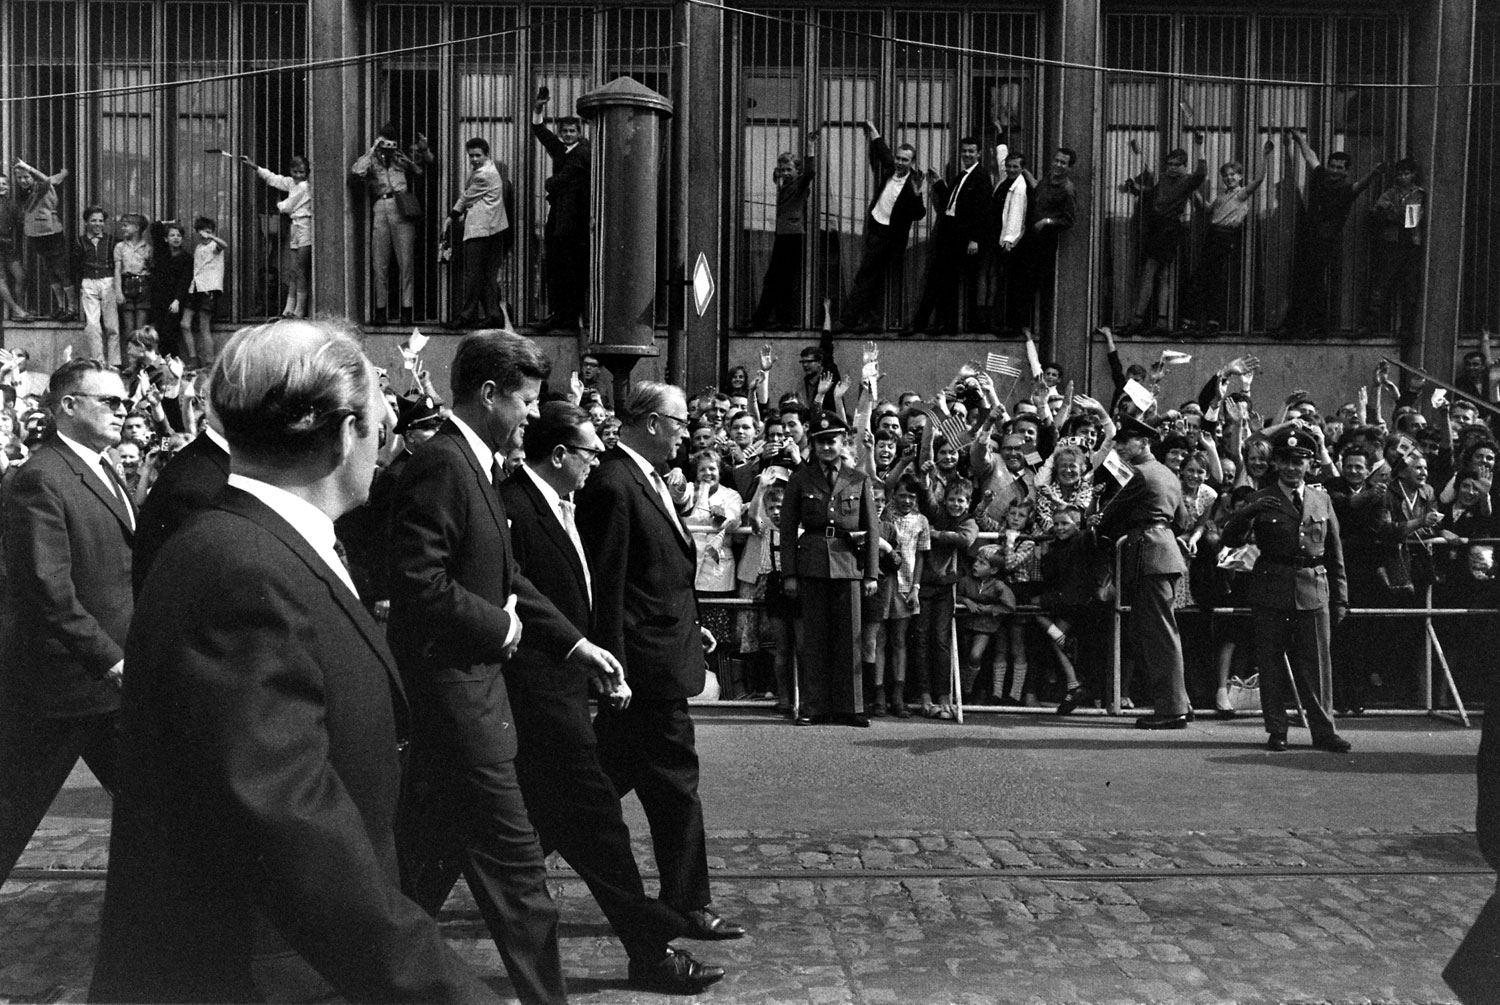 President John F. Kennedy walks with dignitaries during his June 1963 visit to Germany.